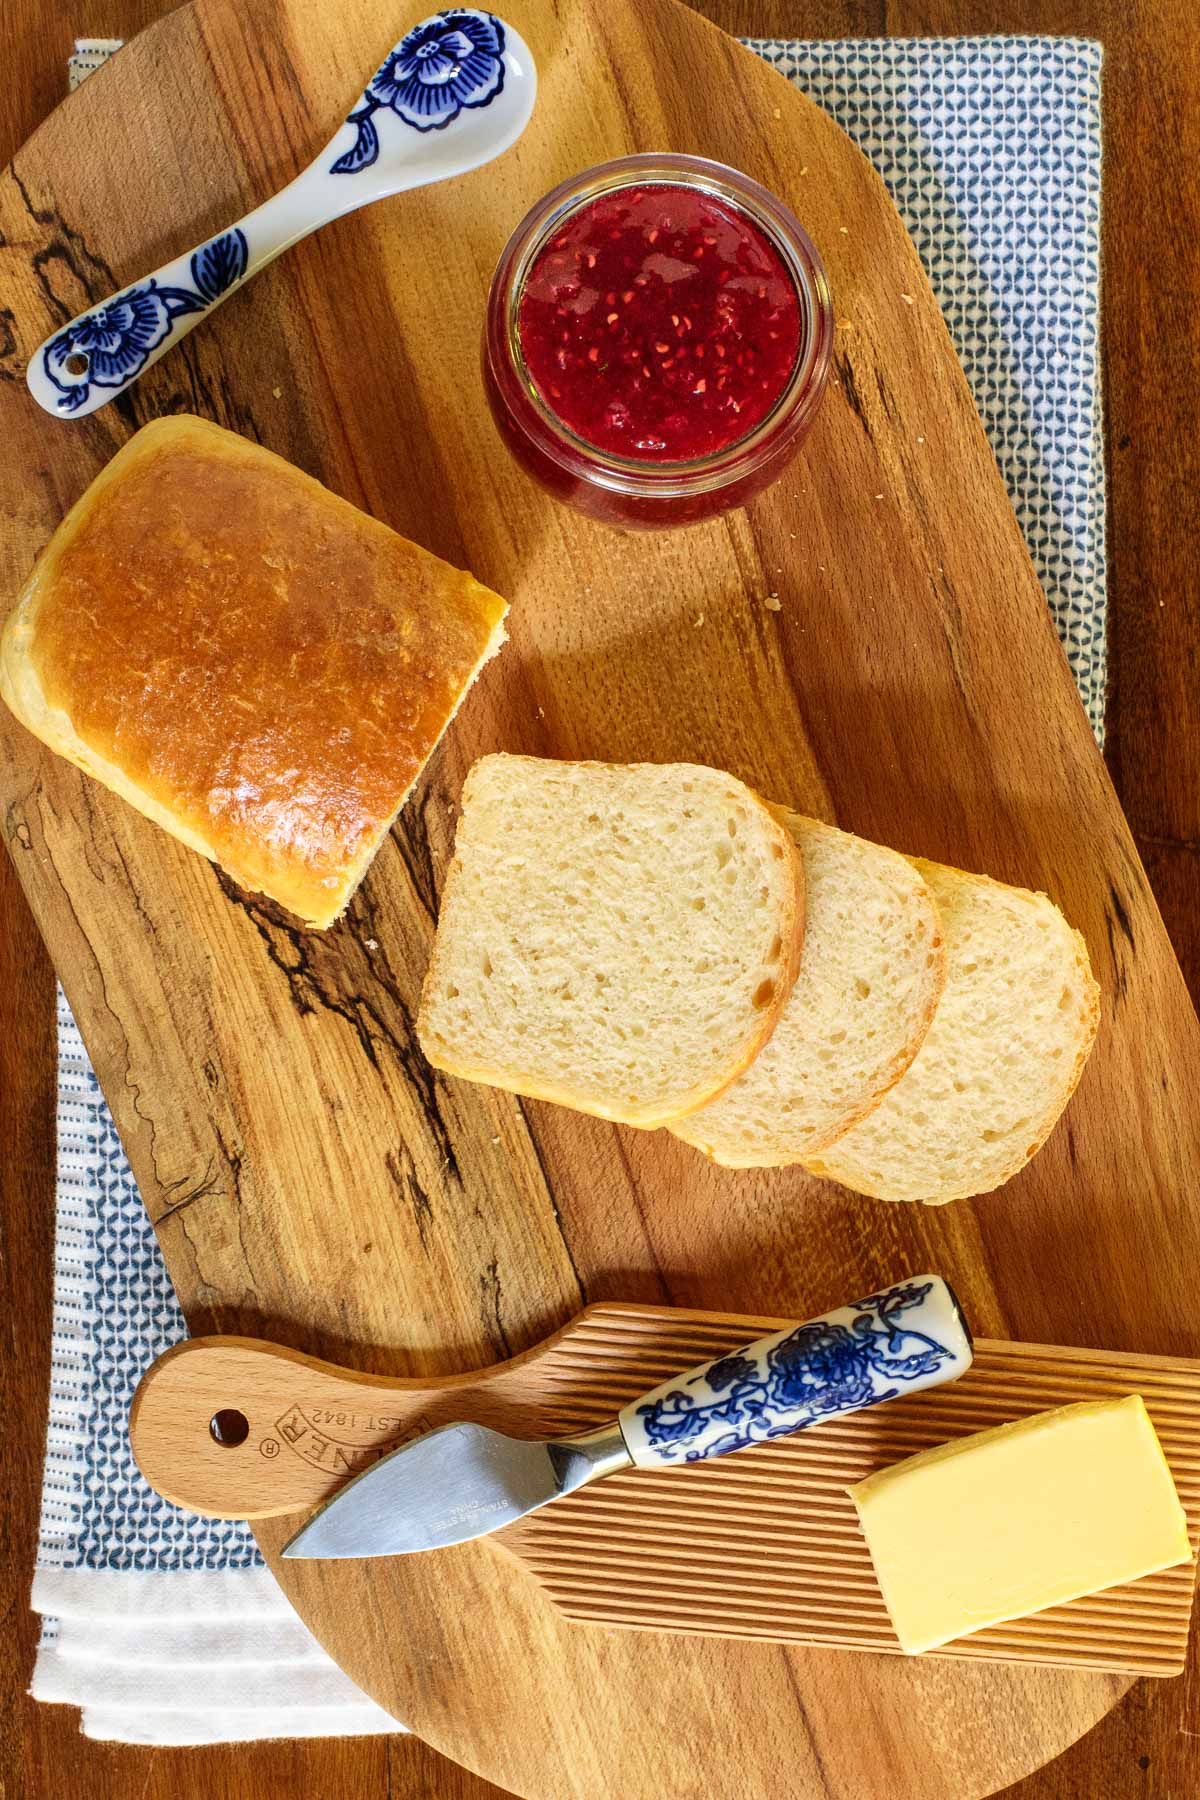 Overhead vertical photo of a loaf of brioche bread sliced on a wooden cutting board with a jar of raspberry jam nearby.